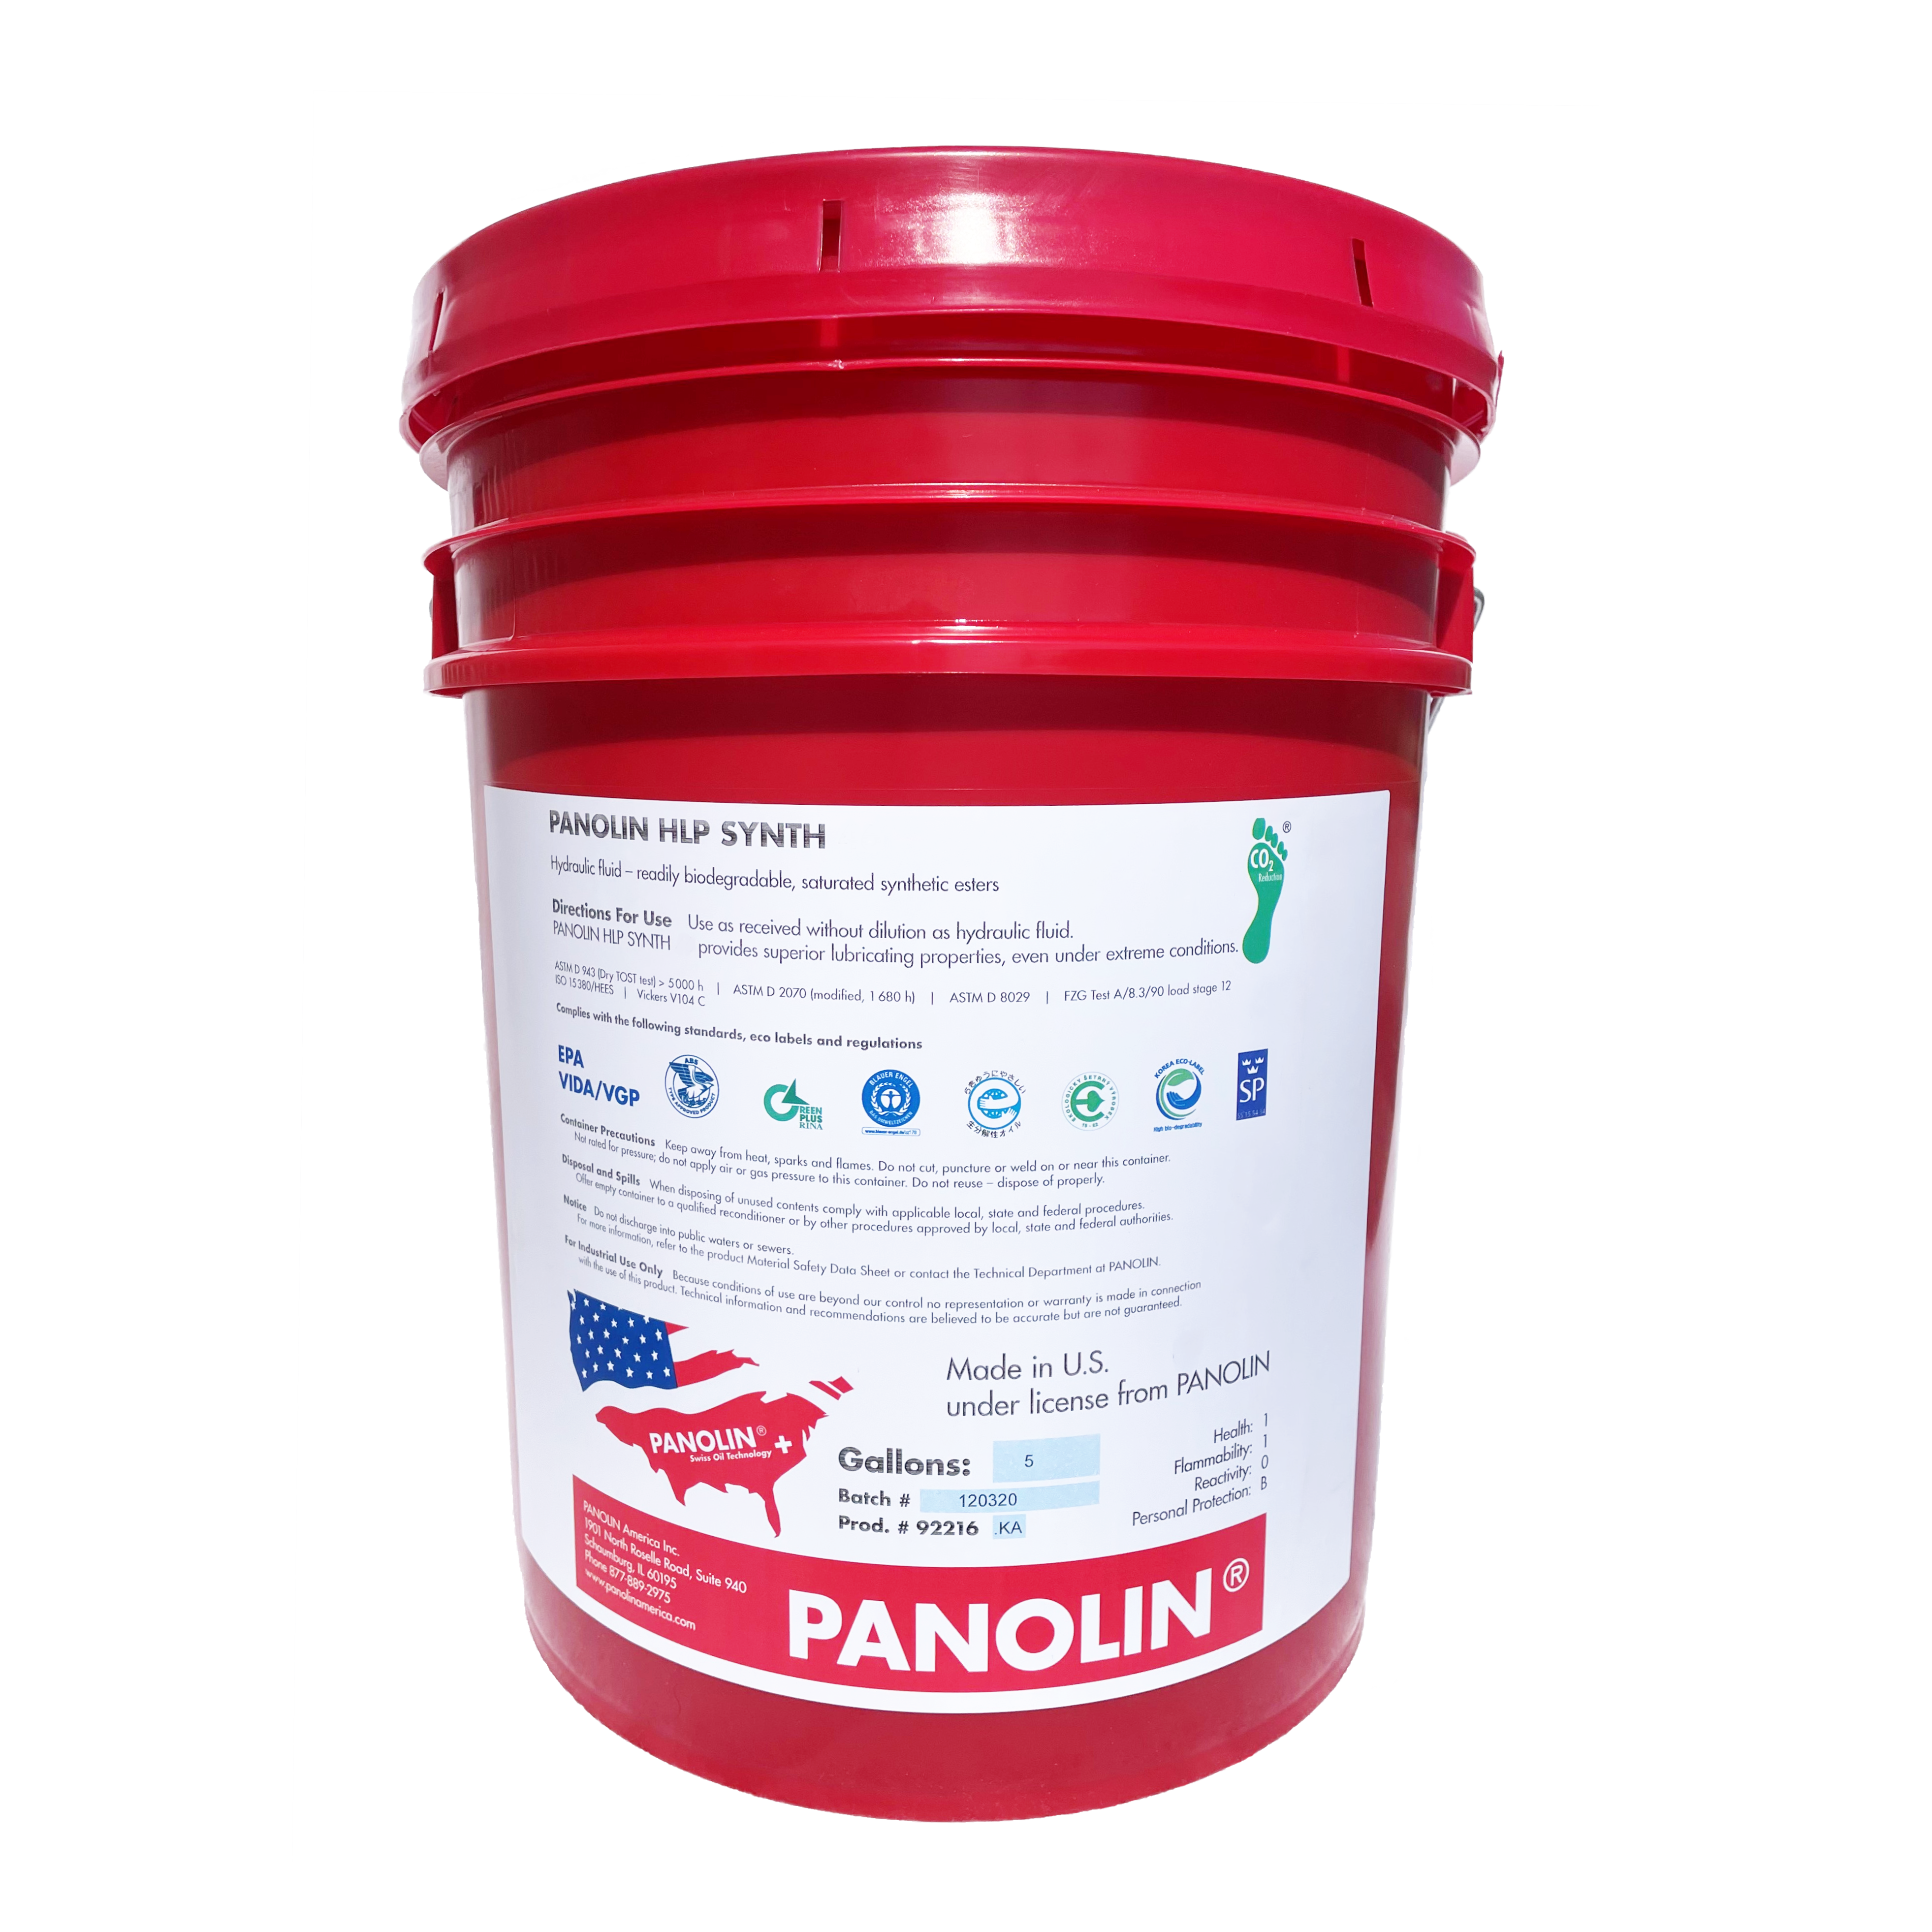 35030.KA : Panolin HLP SYNTH 22, 5 Gallon Pail, Viscosity ISO VG 22 **Call for Price**